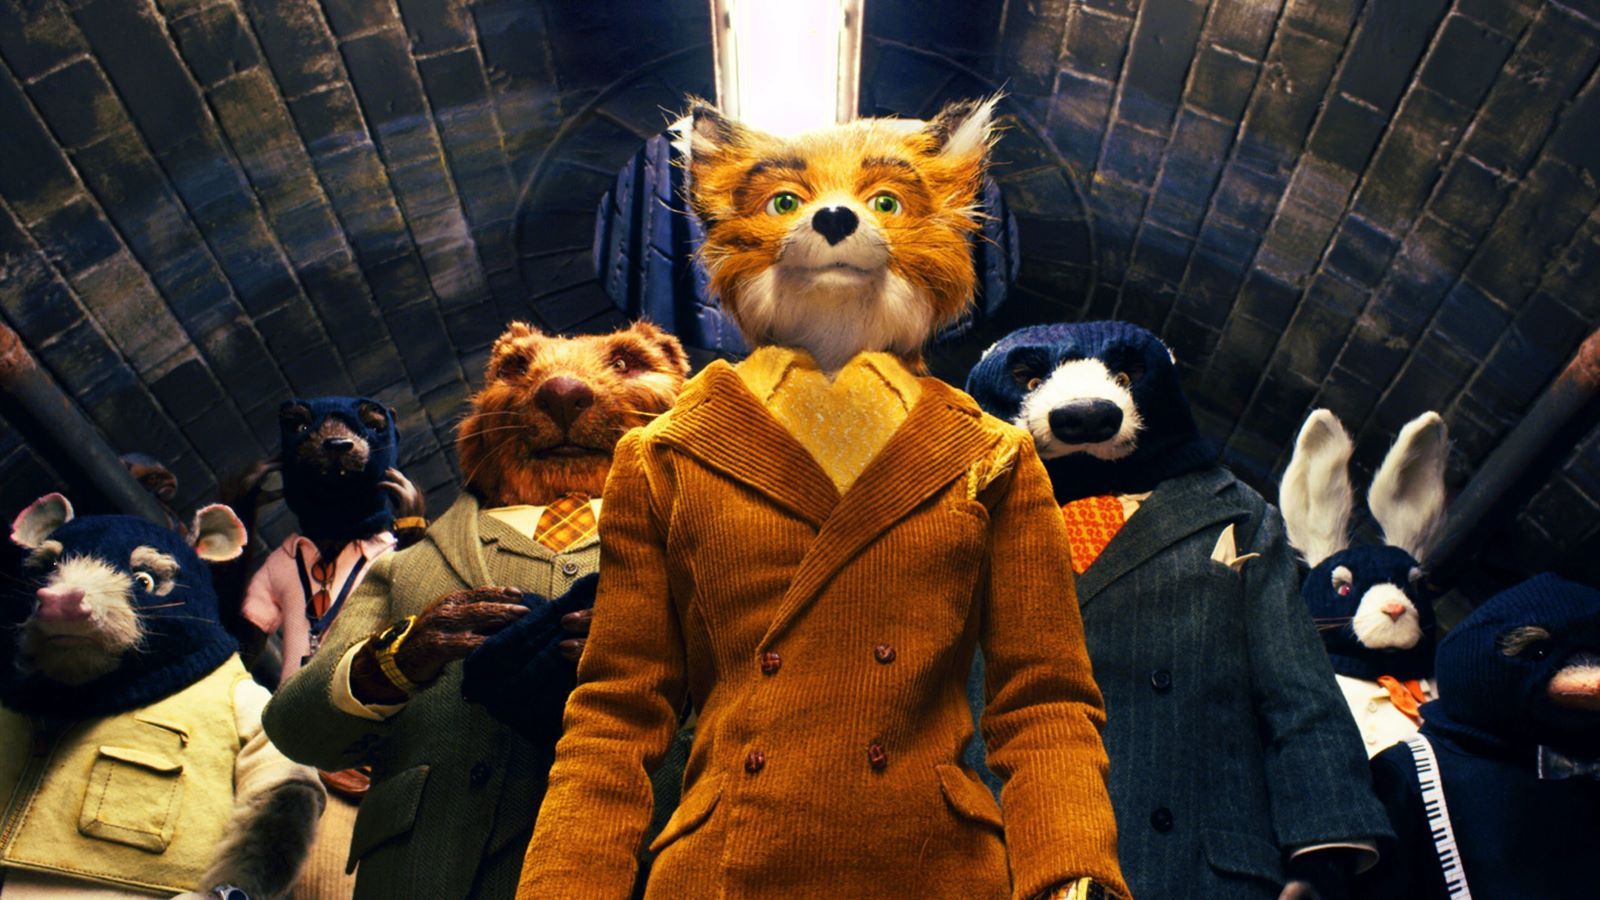 <p>                     Adapted from Roald Dahl’s classic children’s novel, <em><strong>Fantastic Mr. Fox</strong></em> raised the level of detail that Anderson was able to employ in his films, as he and his crew utilized the stop-motion technique to hand-craft every element frame by frame. Anderson’s wit also expanded the film from its children’s novel origins and made it widely accessible to audiences of any age. It’s a shame George Clooney and Meryl Streep, who voice Mr. and Mrs. Fox, haven’t been able to team up with Anderson for a live-action film to date, but their work in the film fits in so easily with both the world of the story and Anderson’s usual troupe of actors. Hopefully Anderson will continue to return to stop-motion animation from time to time as he has proven a master of it with his first two entries.                    </p>